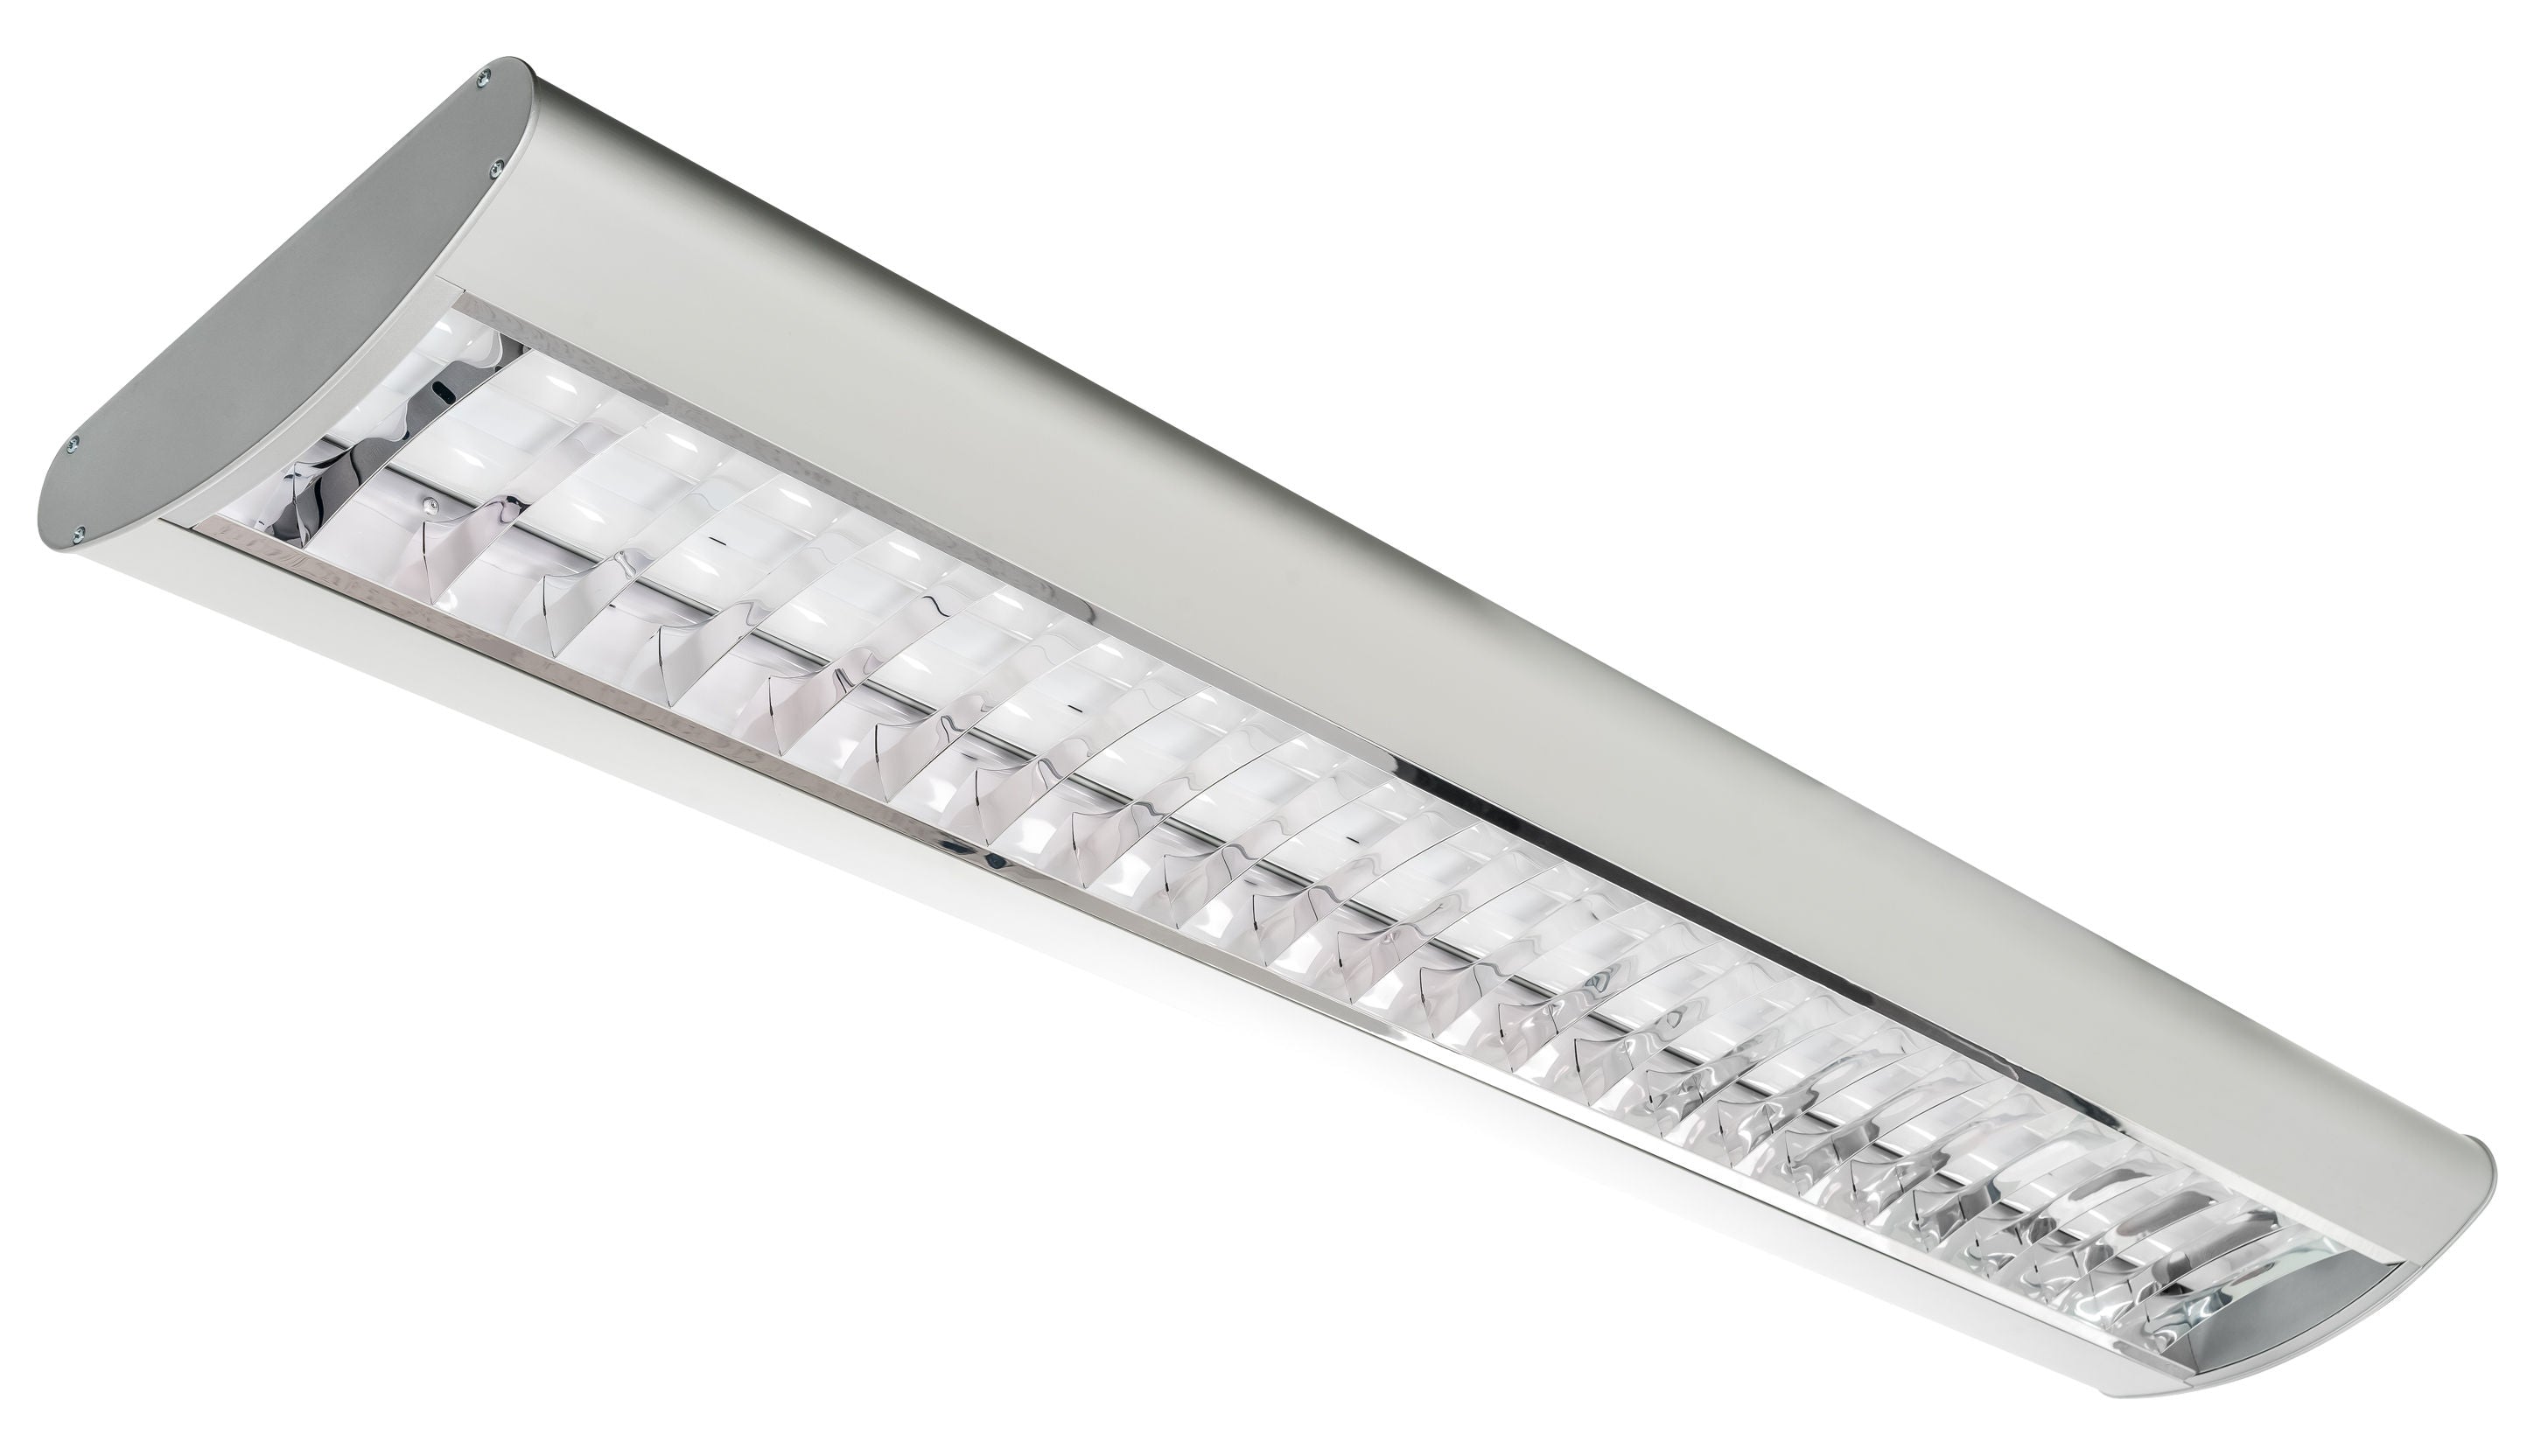 Westgate SCLP-4FT-40W-40K-D LED Architectural Parabolic Suspended Down Light - White